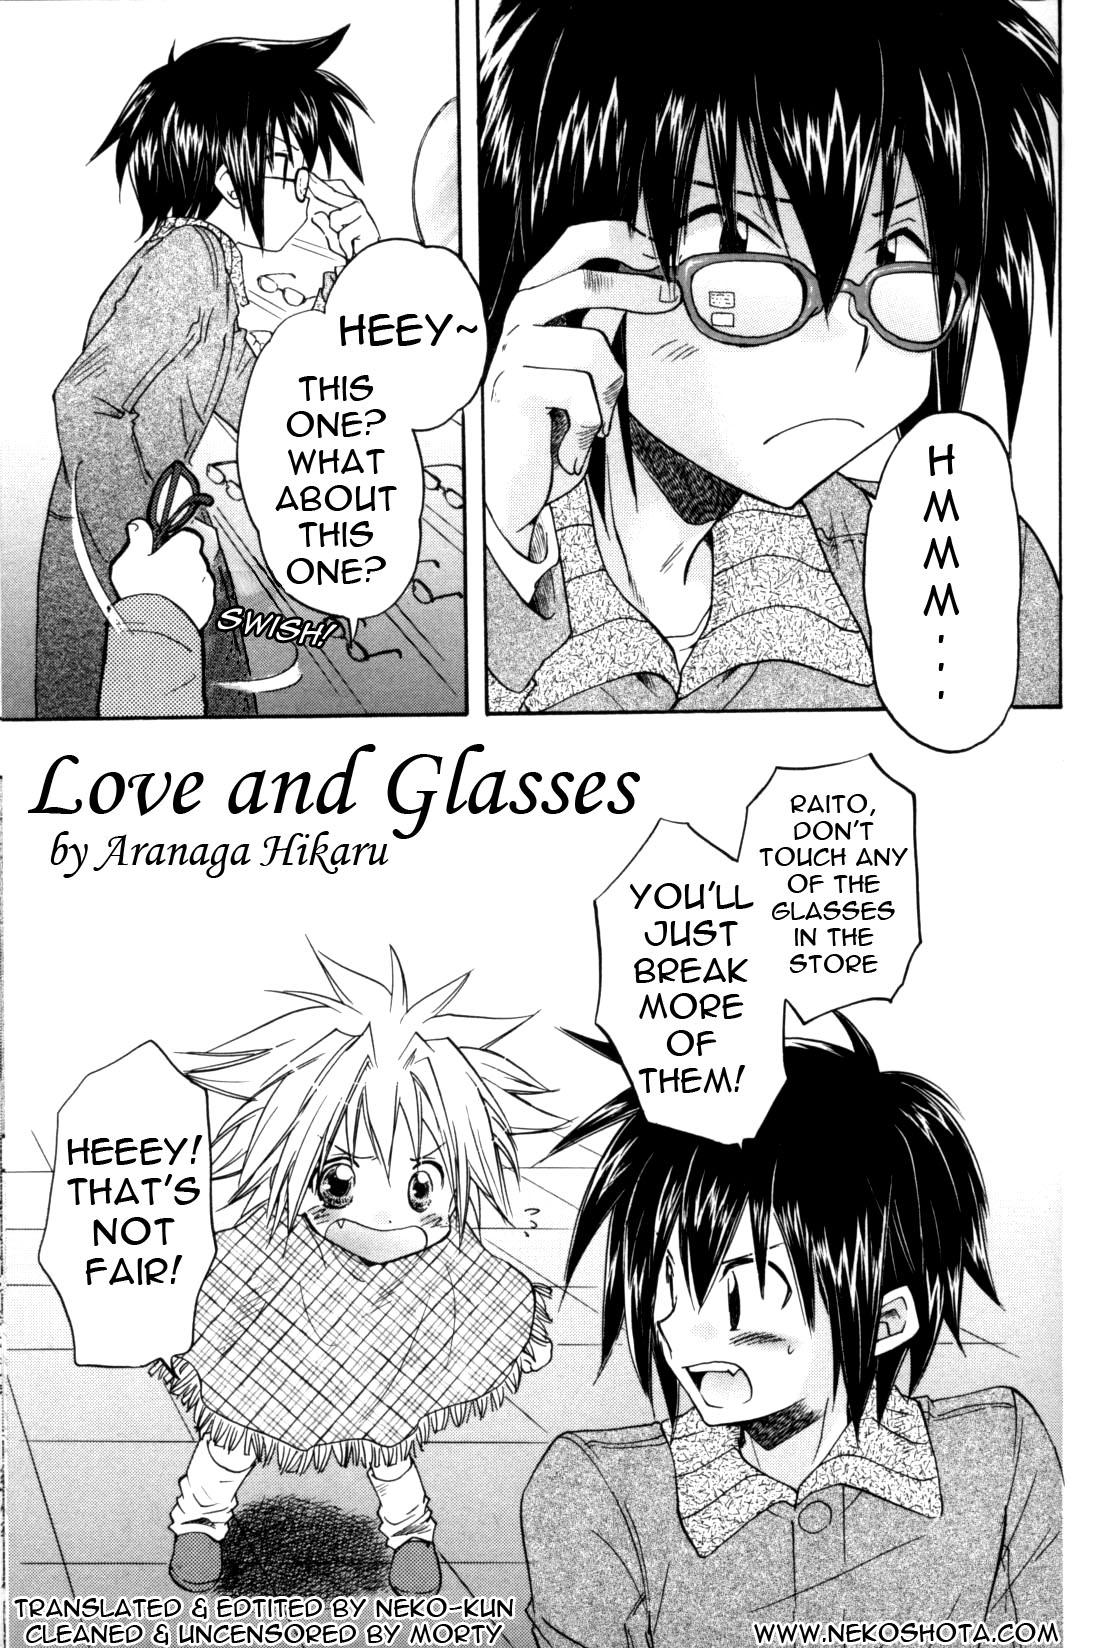 Love and glasses 0